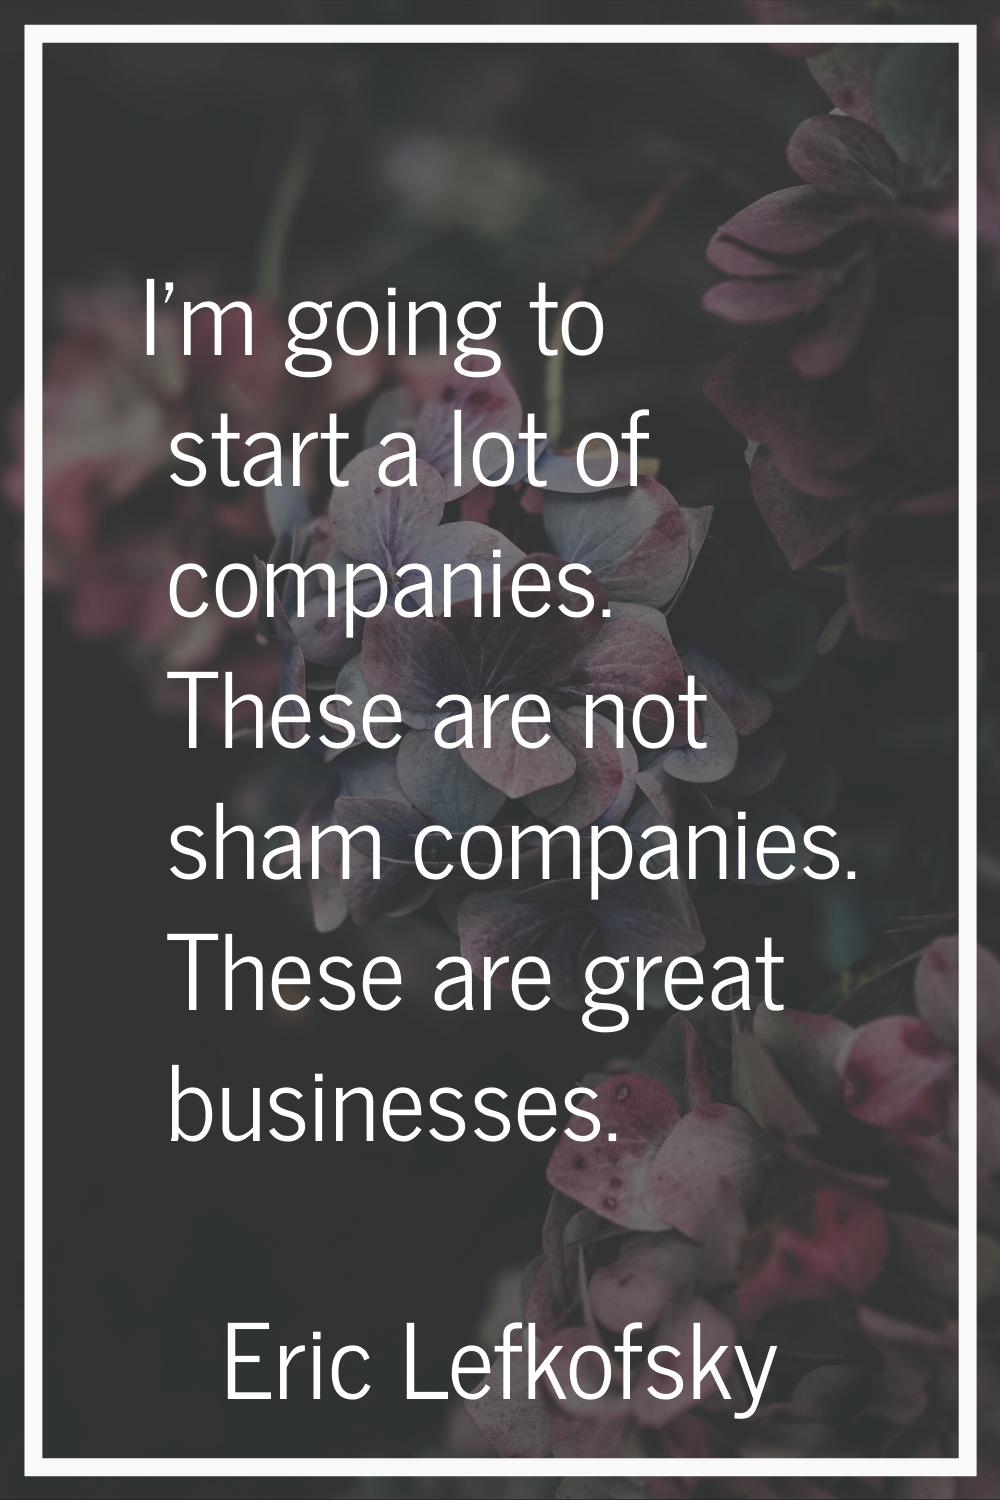 I'm going to start a lot of companies. These are not sham companies. These are great businesses.